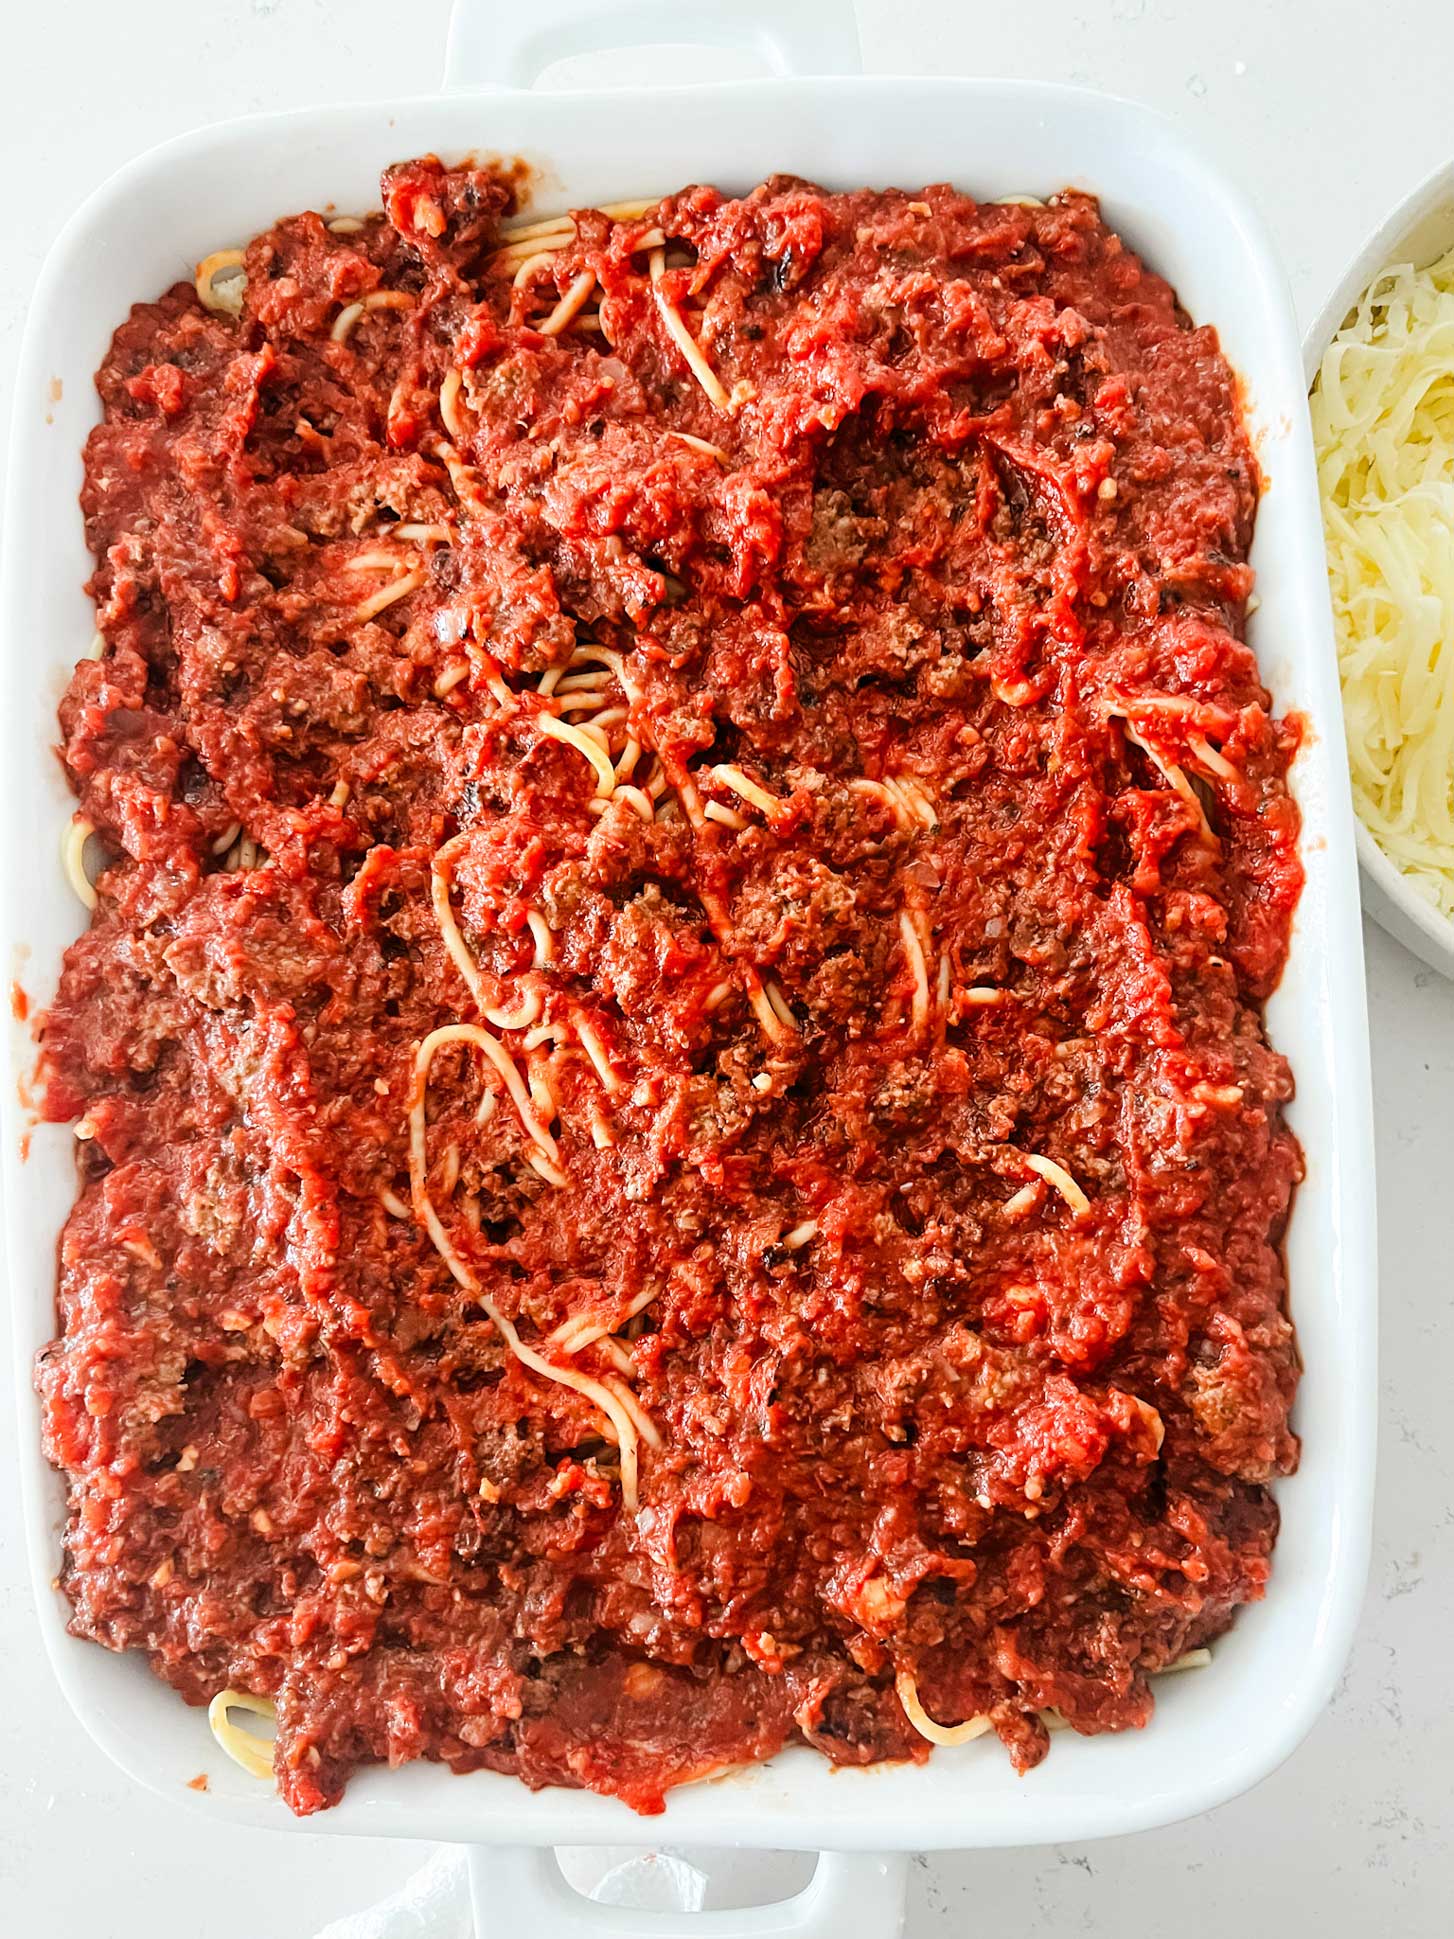 Meat sauce layered on top of a baked spaghetti.